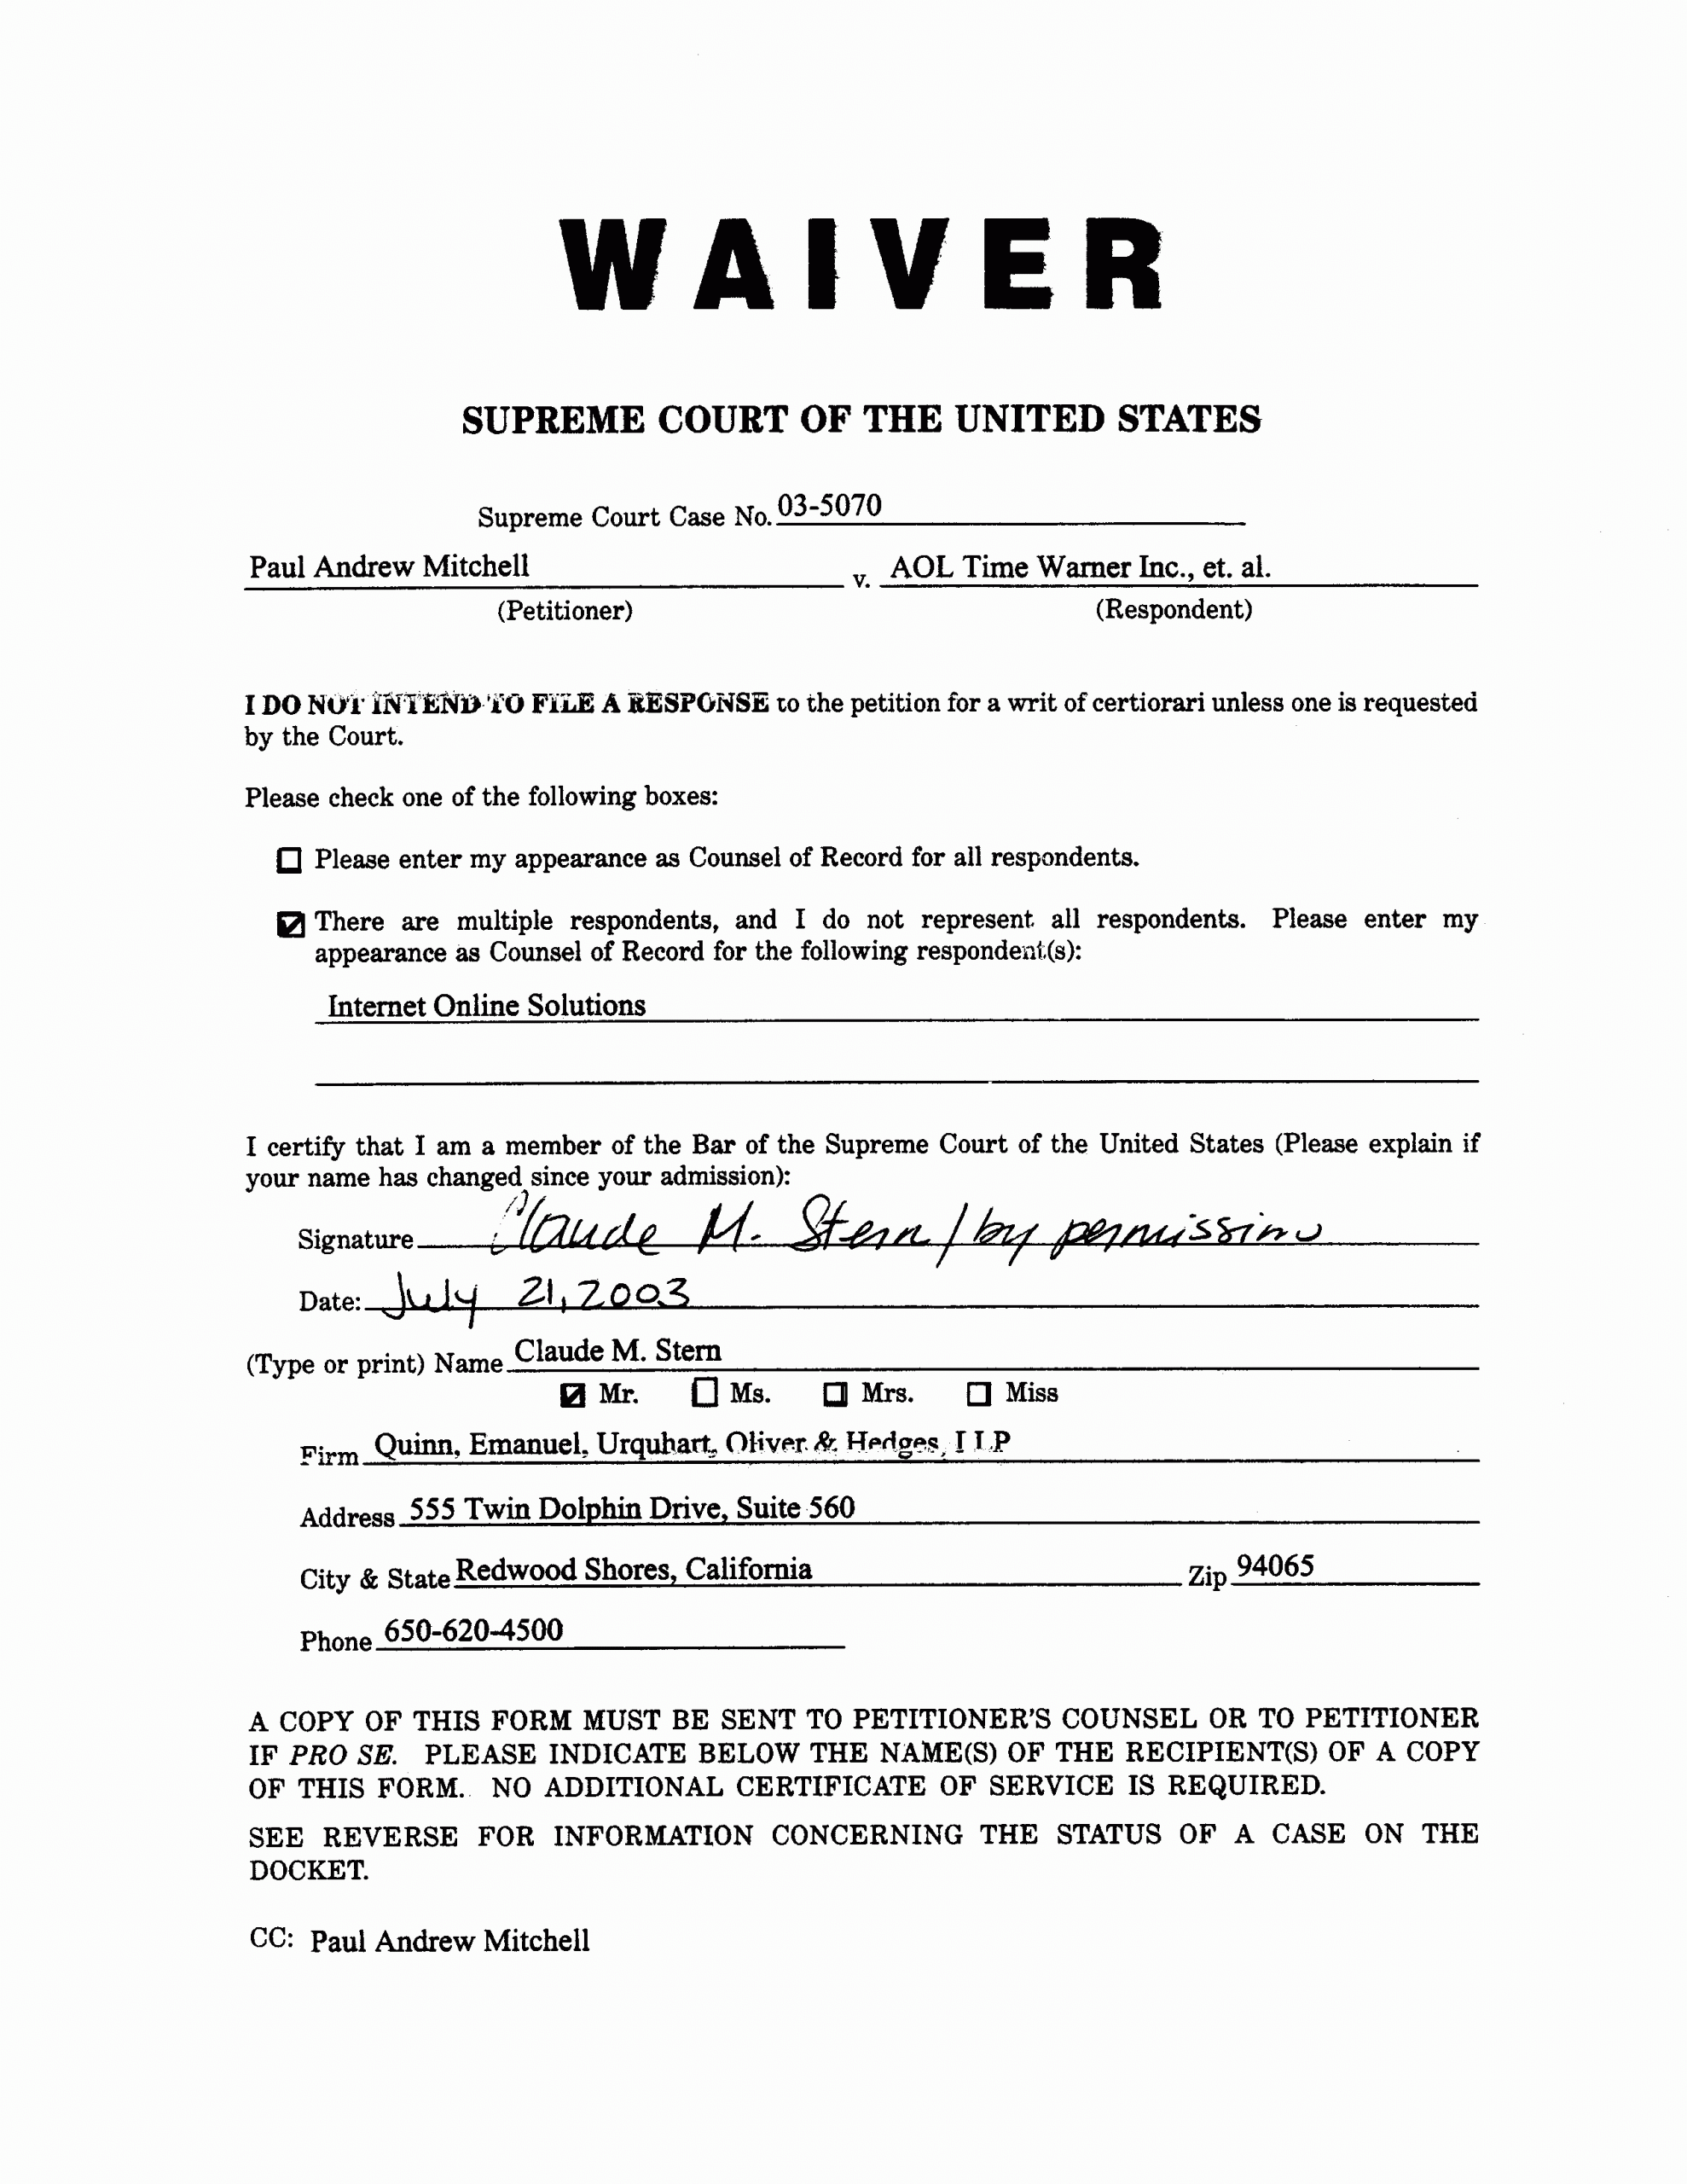 Sports Waiver form Template Elegant Index Of Cc Aol Waiver 2003 07 21 2